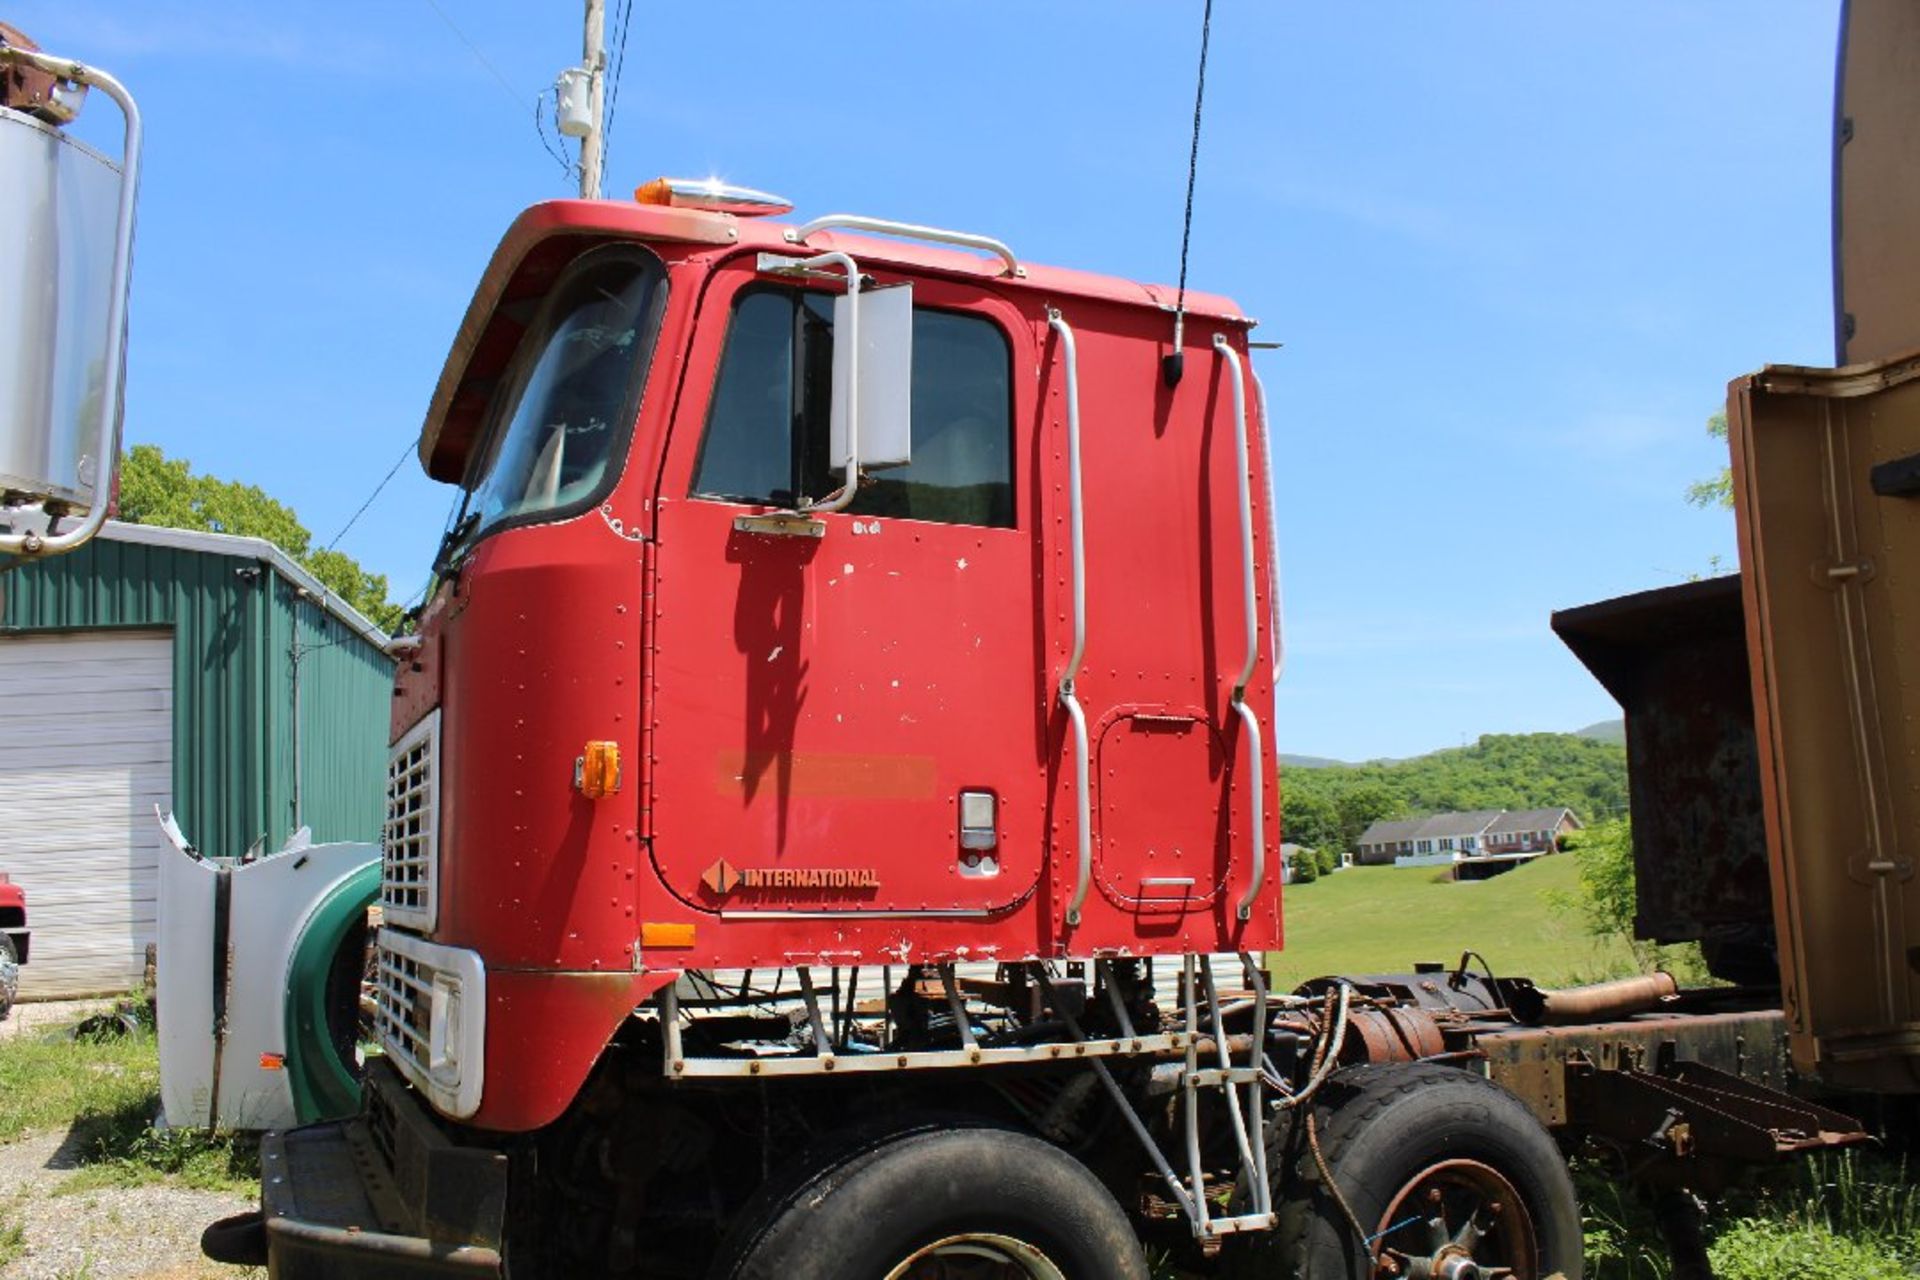 1980 International Day Cab Road Tractor, Salvage, No Motor or Transmission, NO TITLE EVER. Item - Image 2 of 4